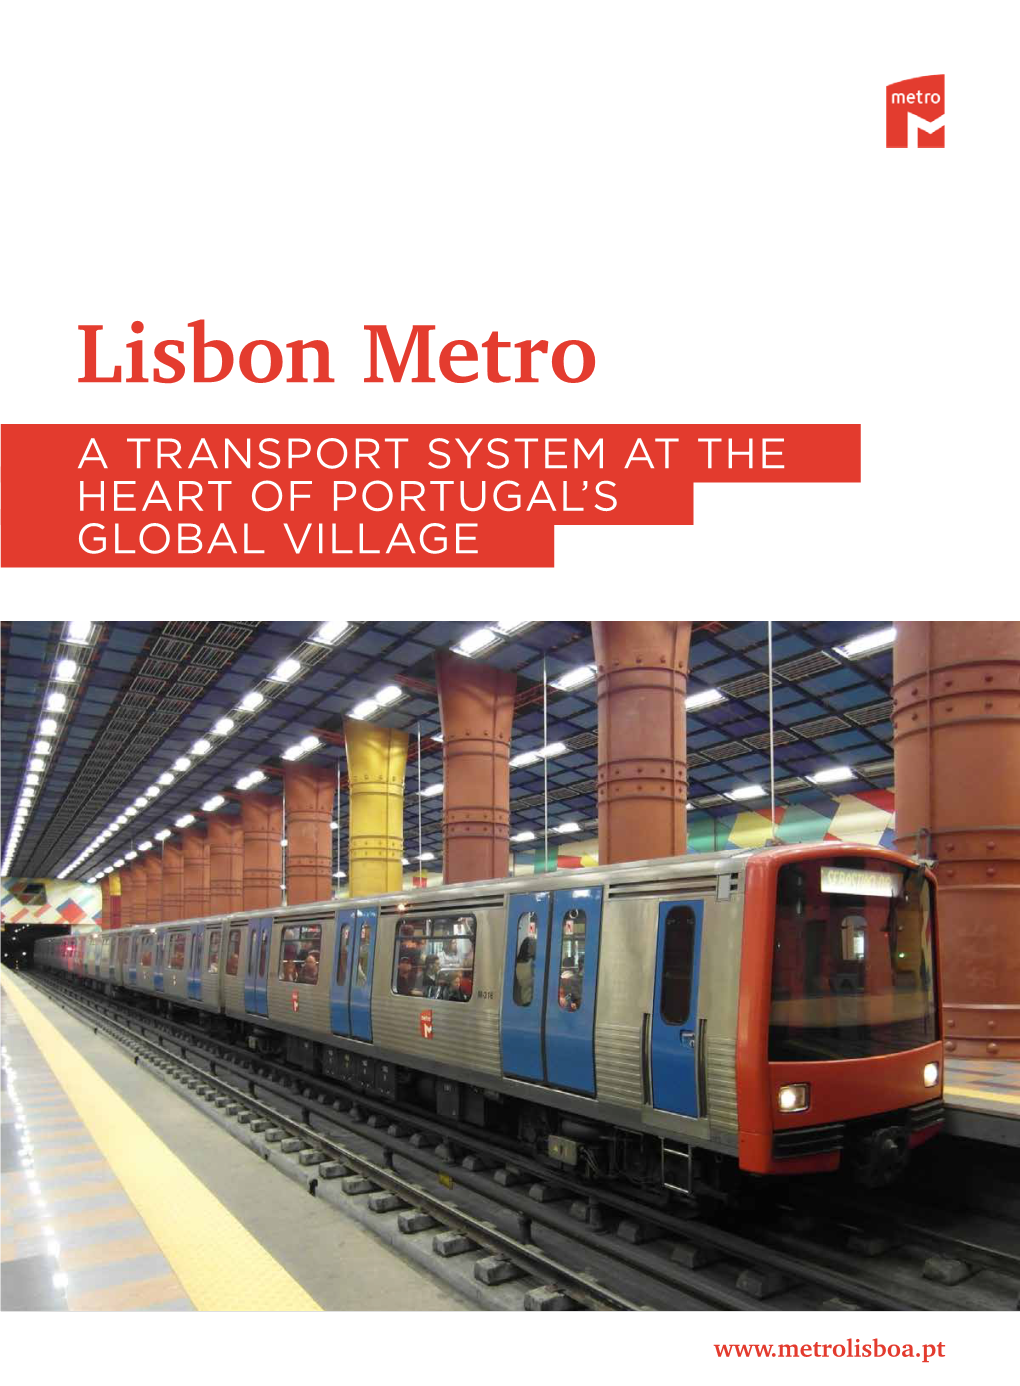 Lisbon Metro a TRANSPORT SYSTEM at the HEART of PORTUGAL’S GLOBAL VILLAGE